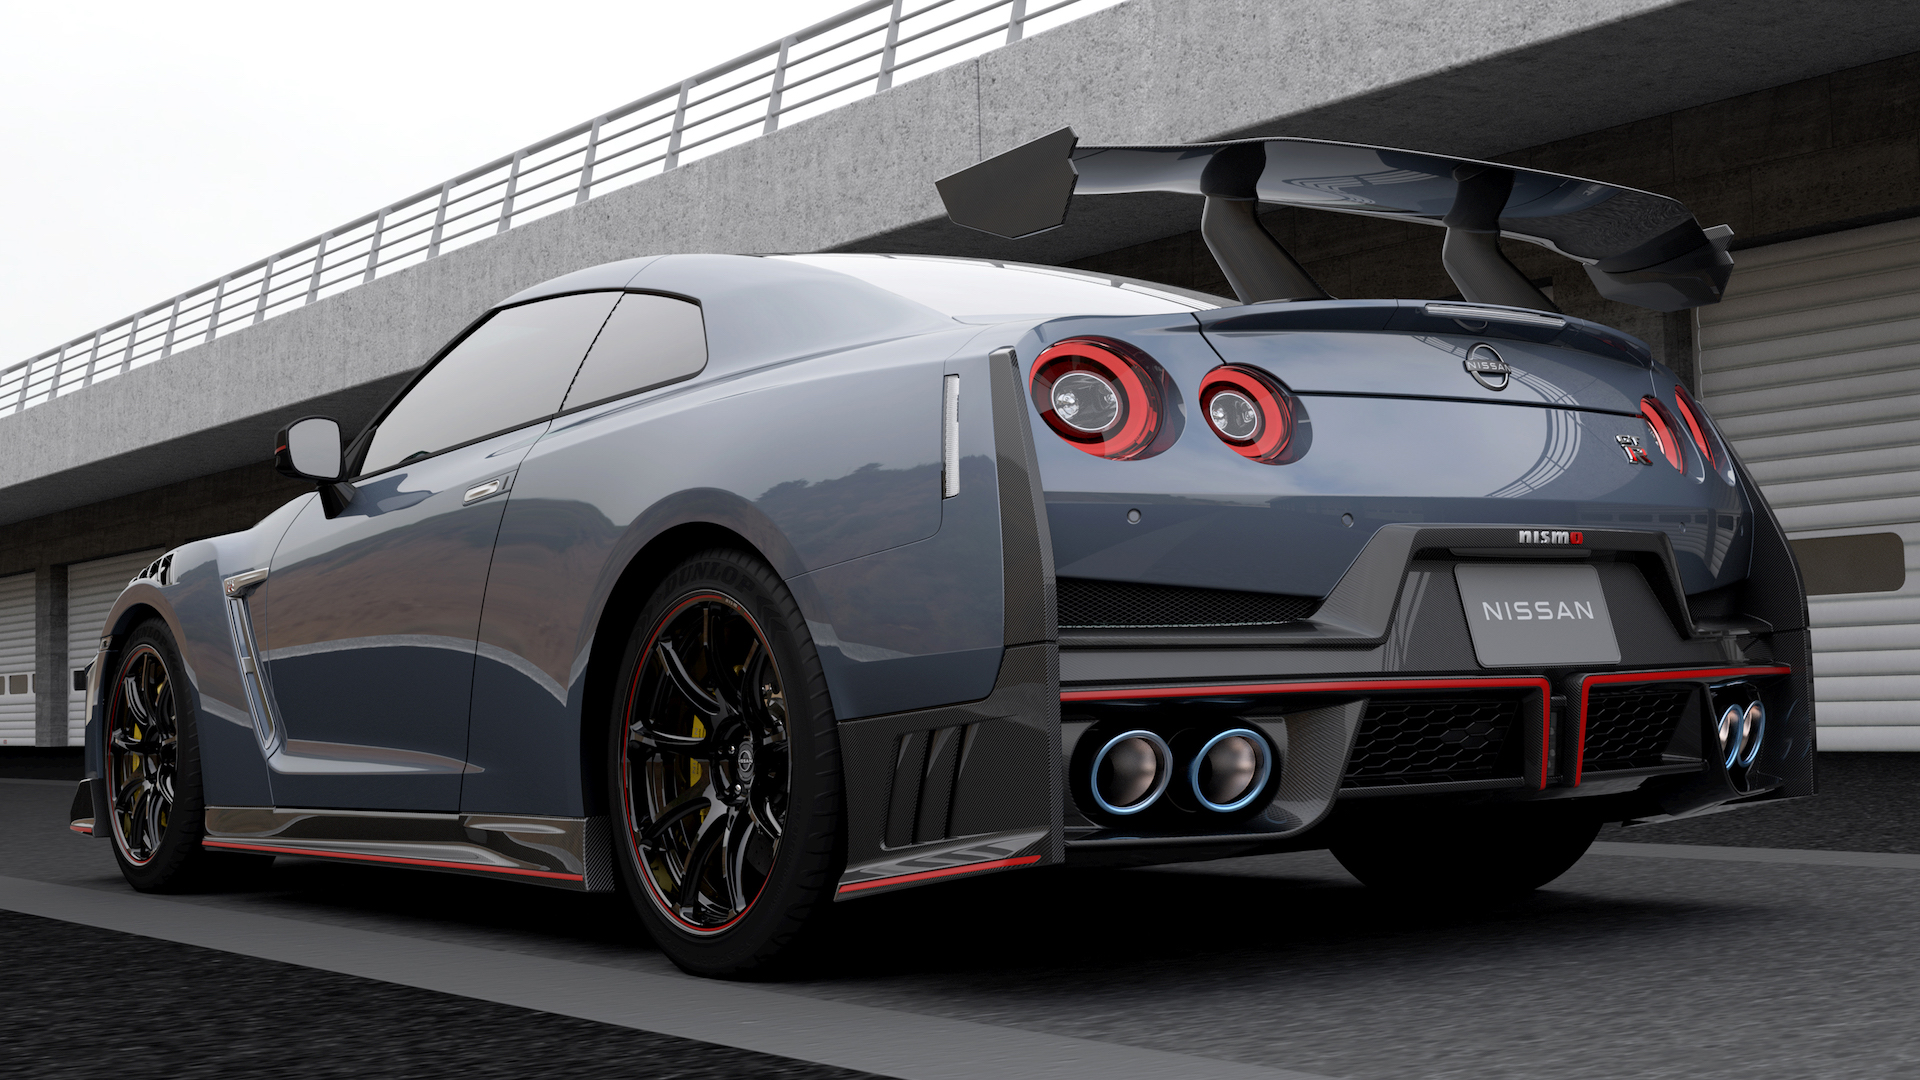 Godzilla lives! Nissan GT-R sports car updated for 15th year of sales